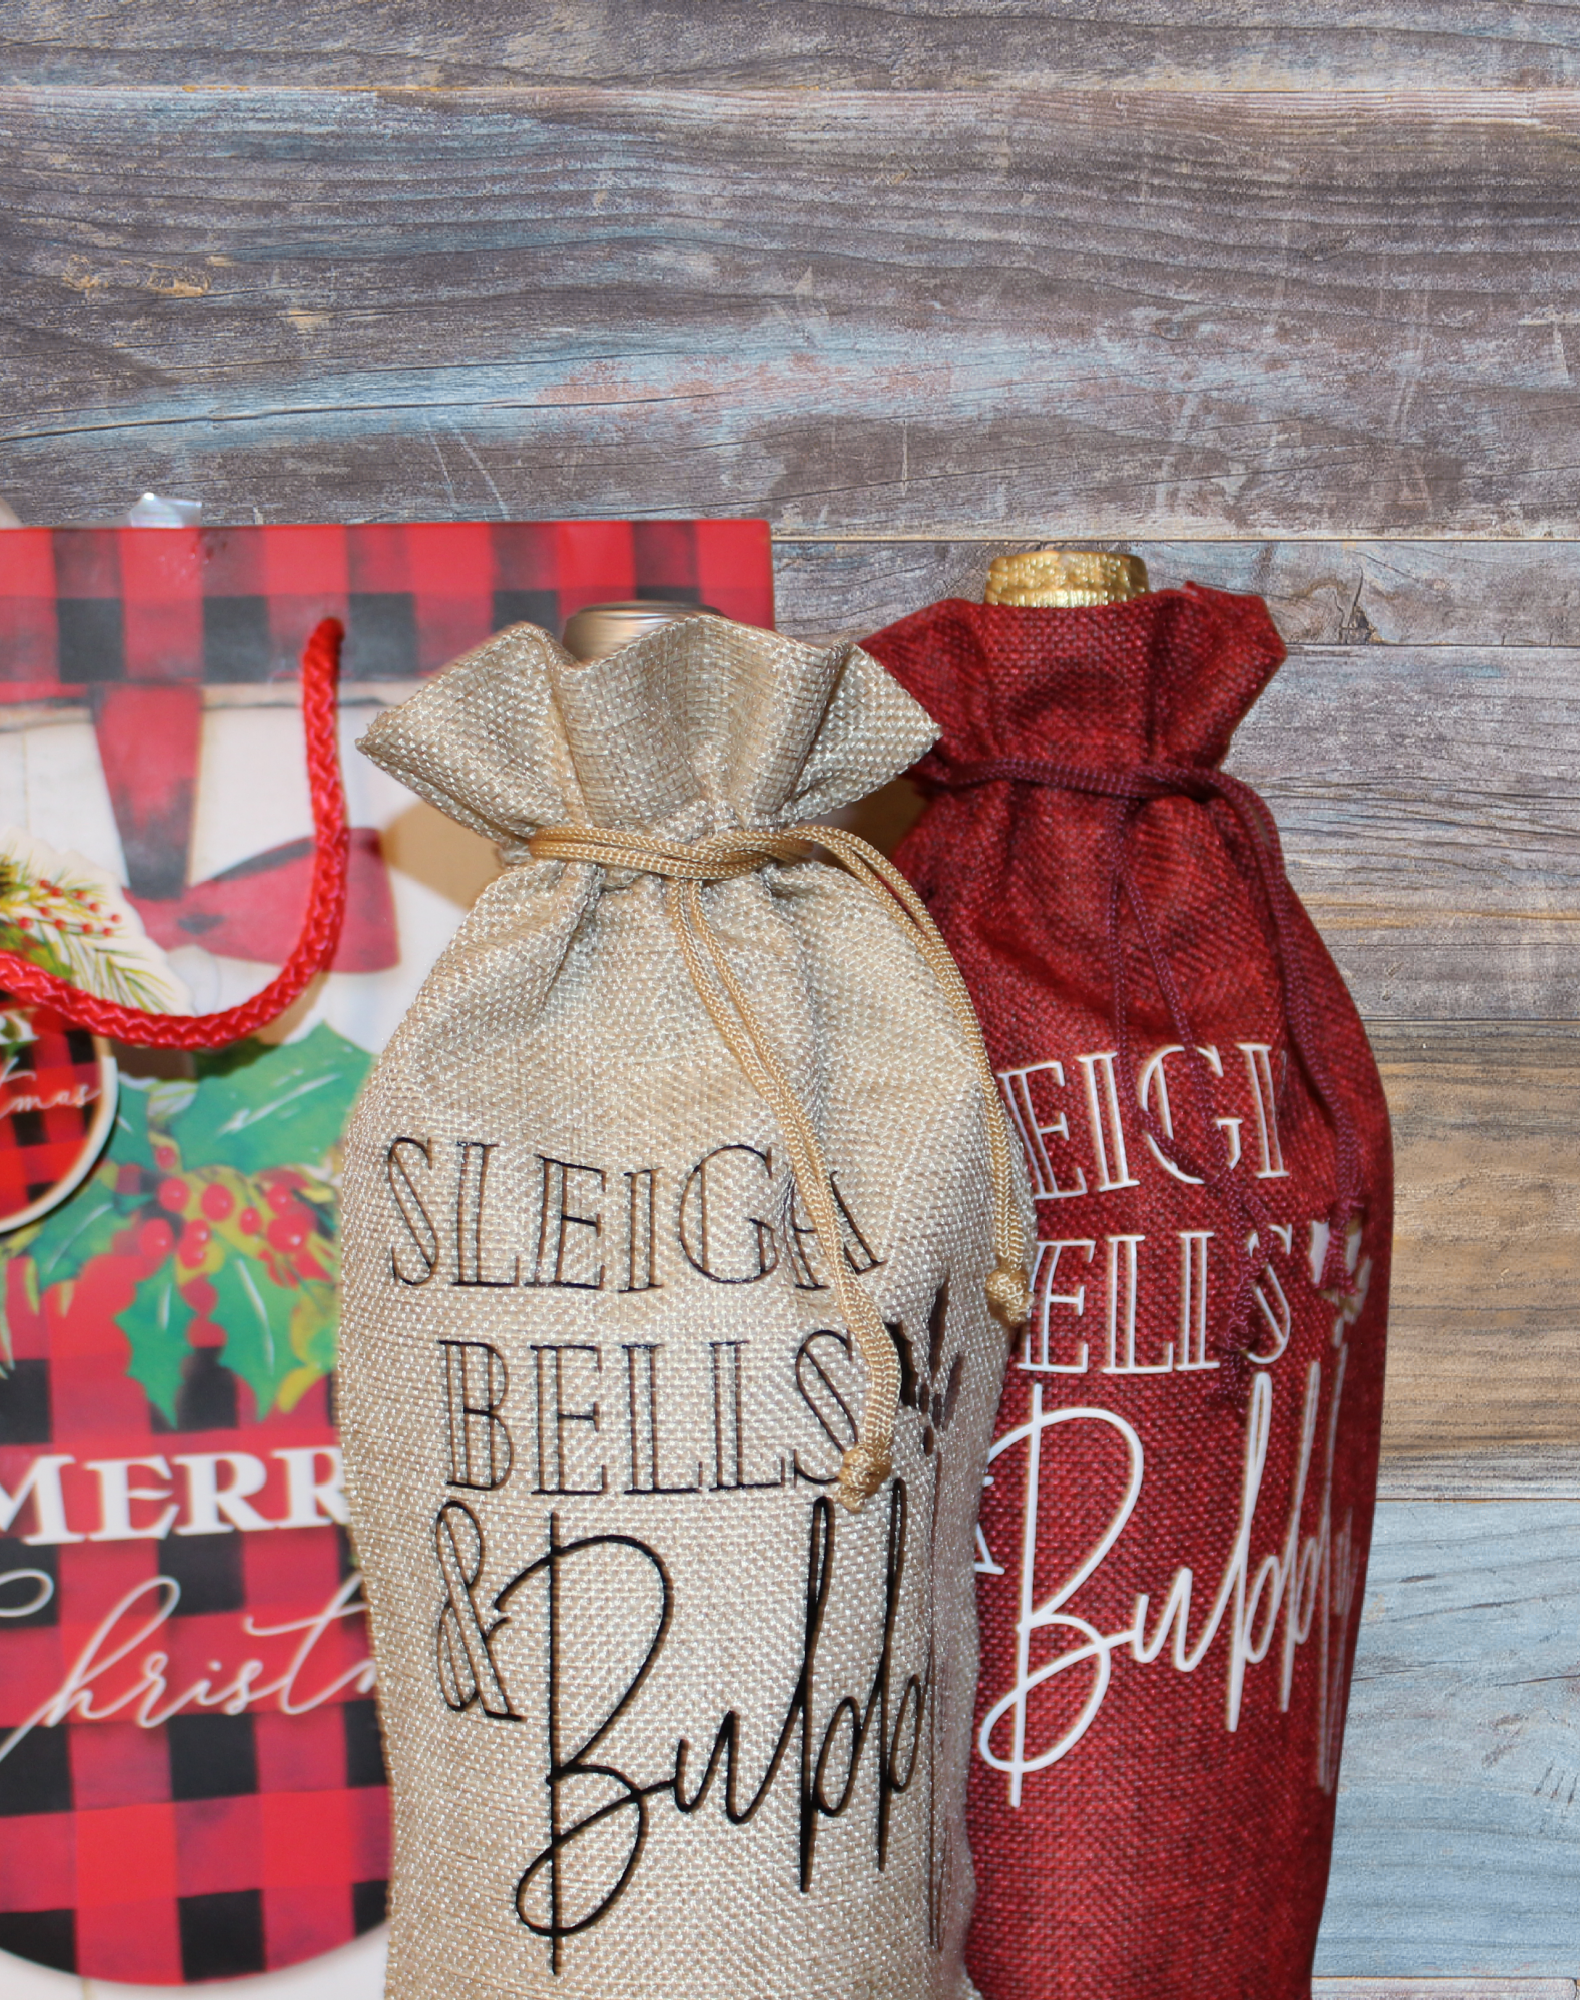 "SLEIGH BELLS & BUBBLY" Wine Bag